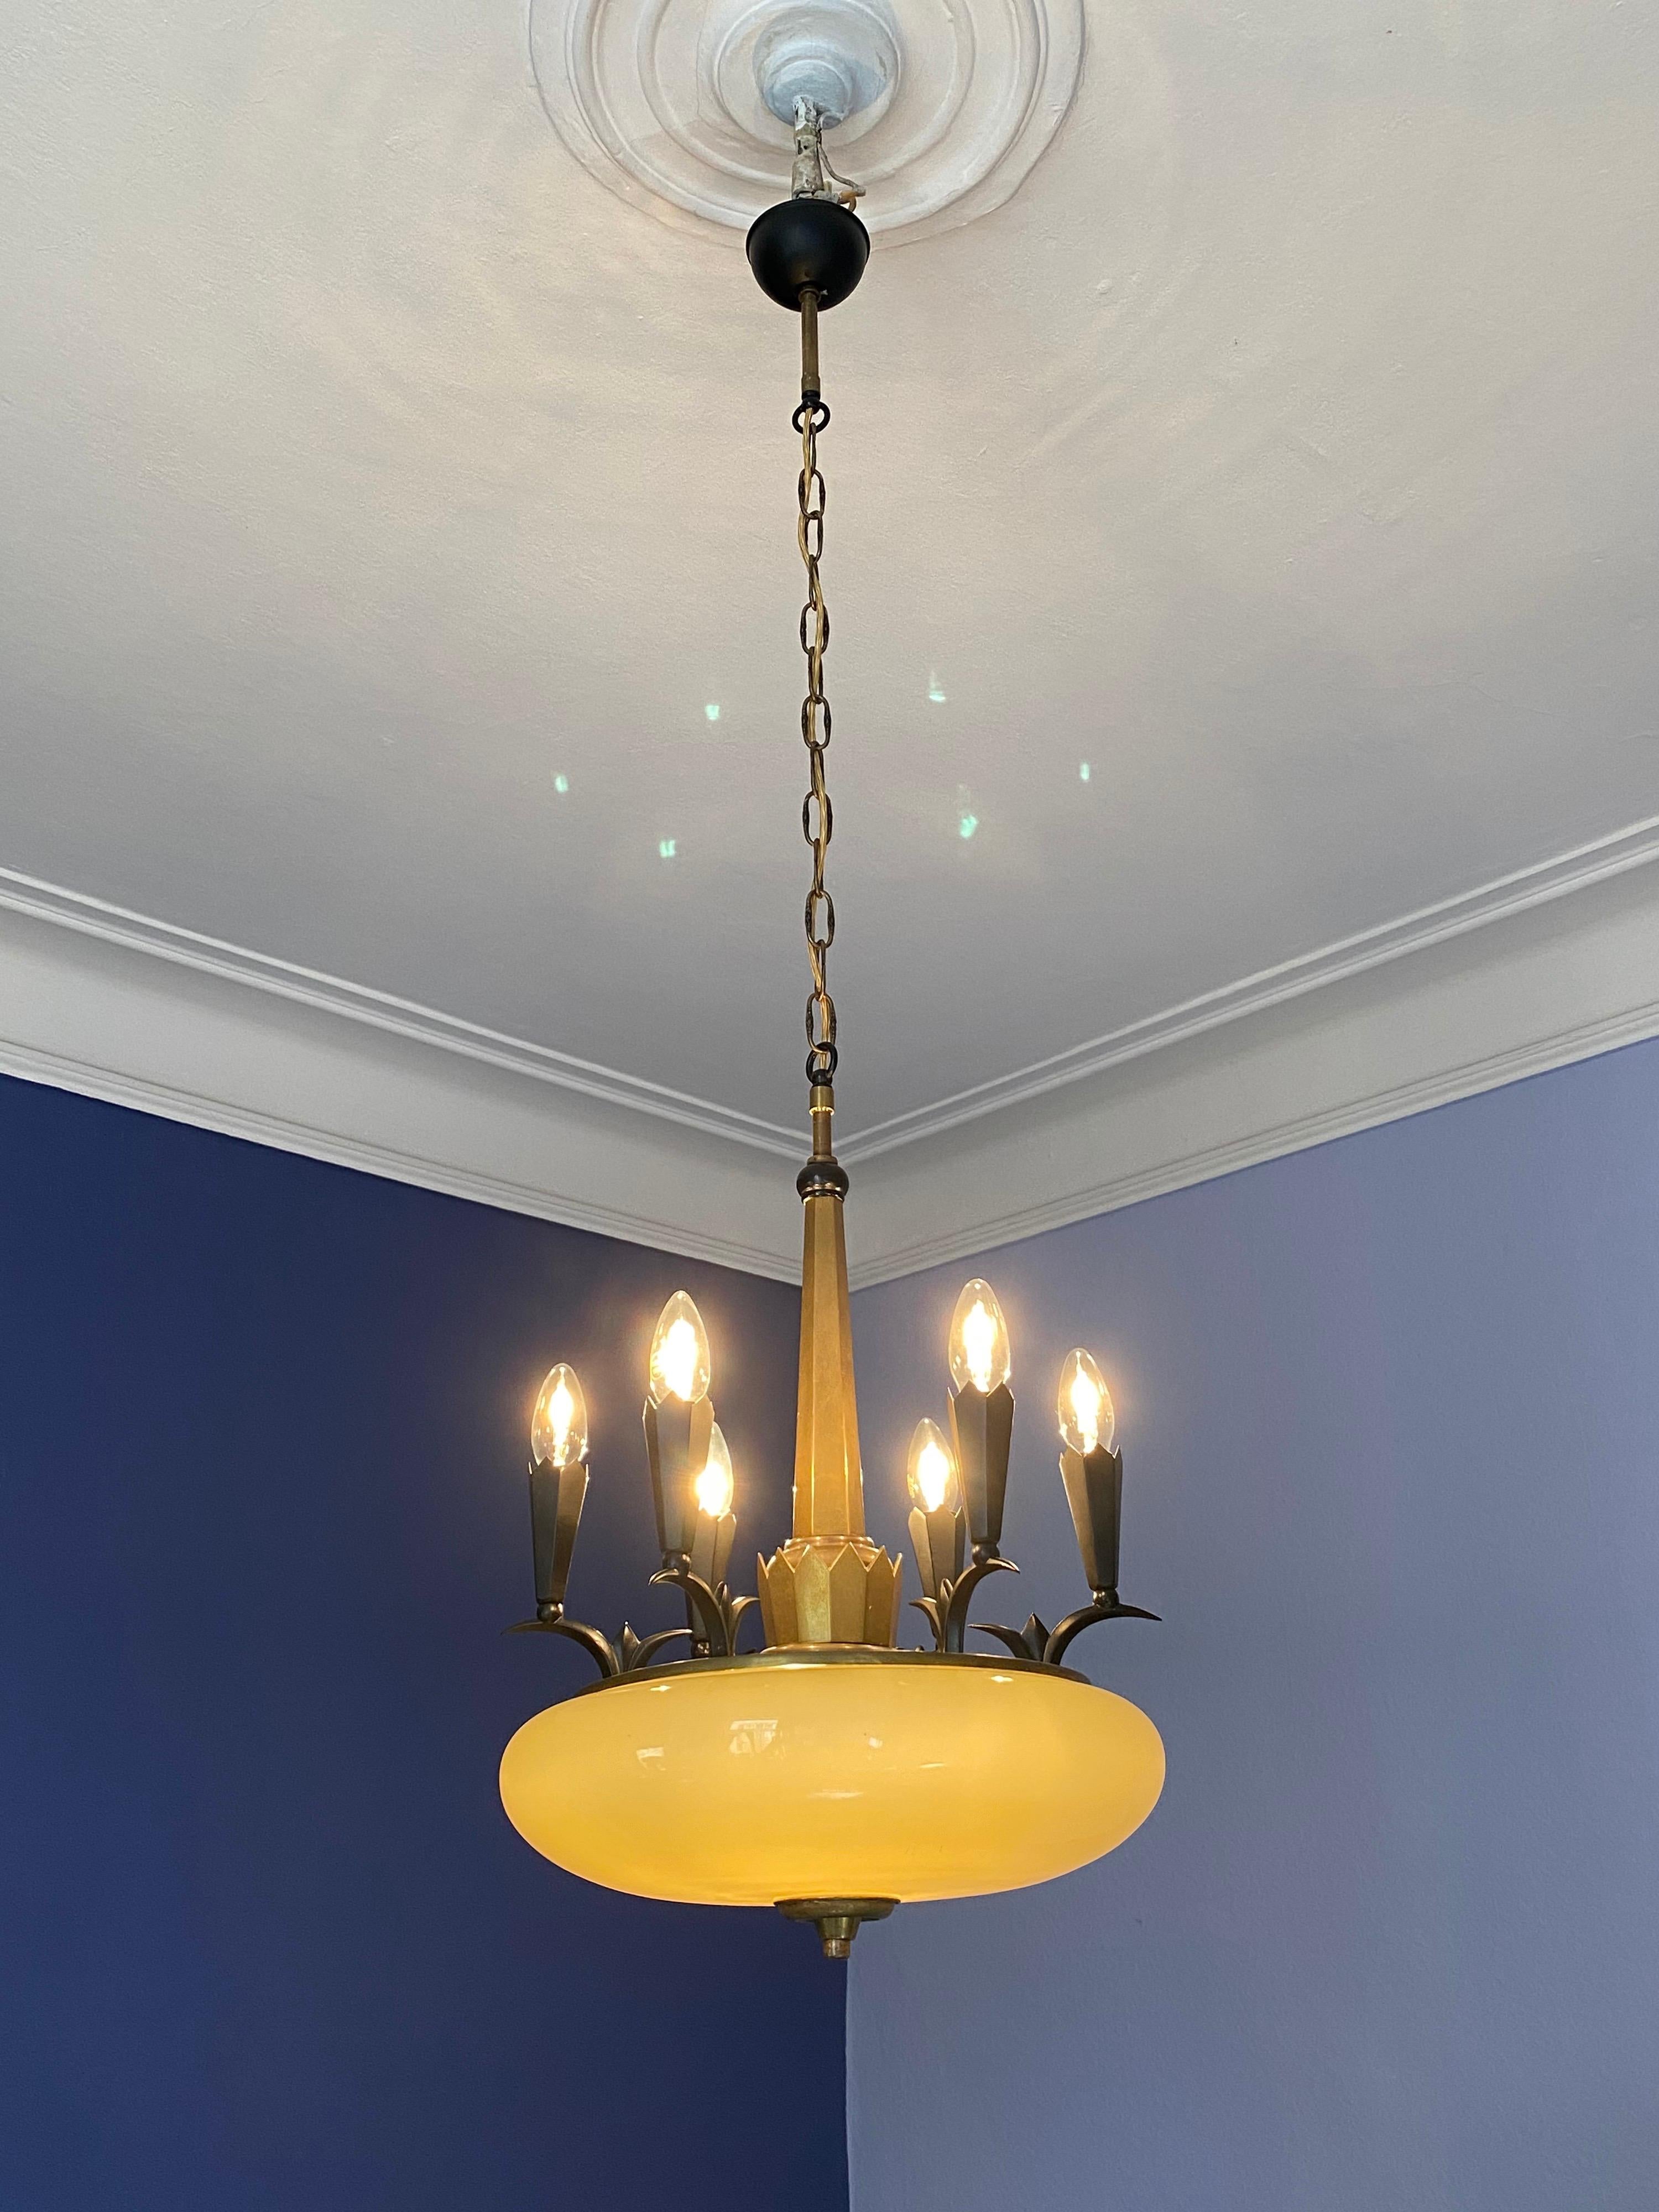 Cold-Painted Art Deco Dagobert Peche Chandelier, Vienna Secession, in Brass and Glas, 1920s For Sale